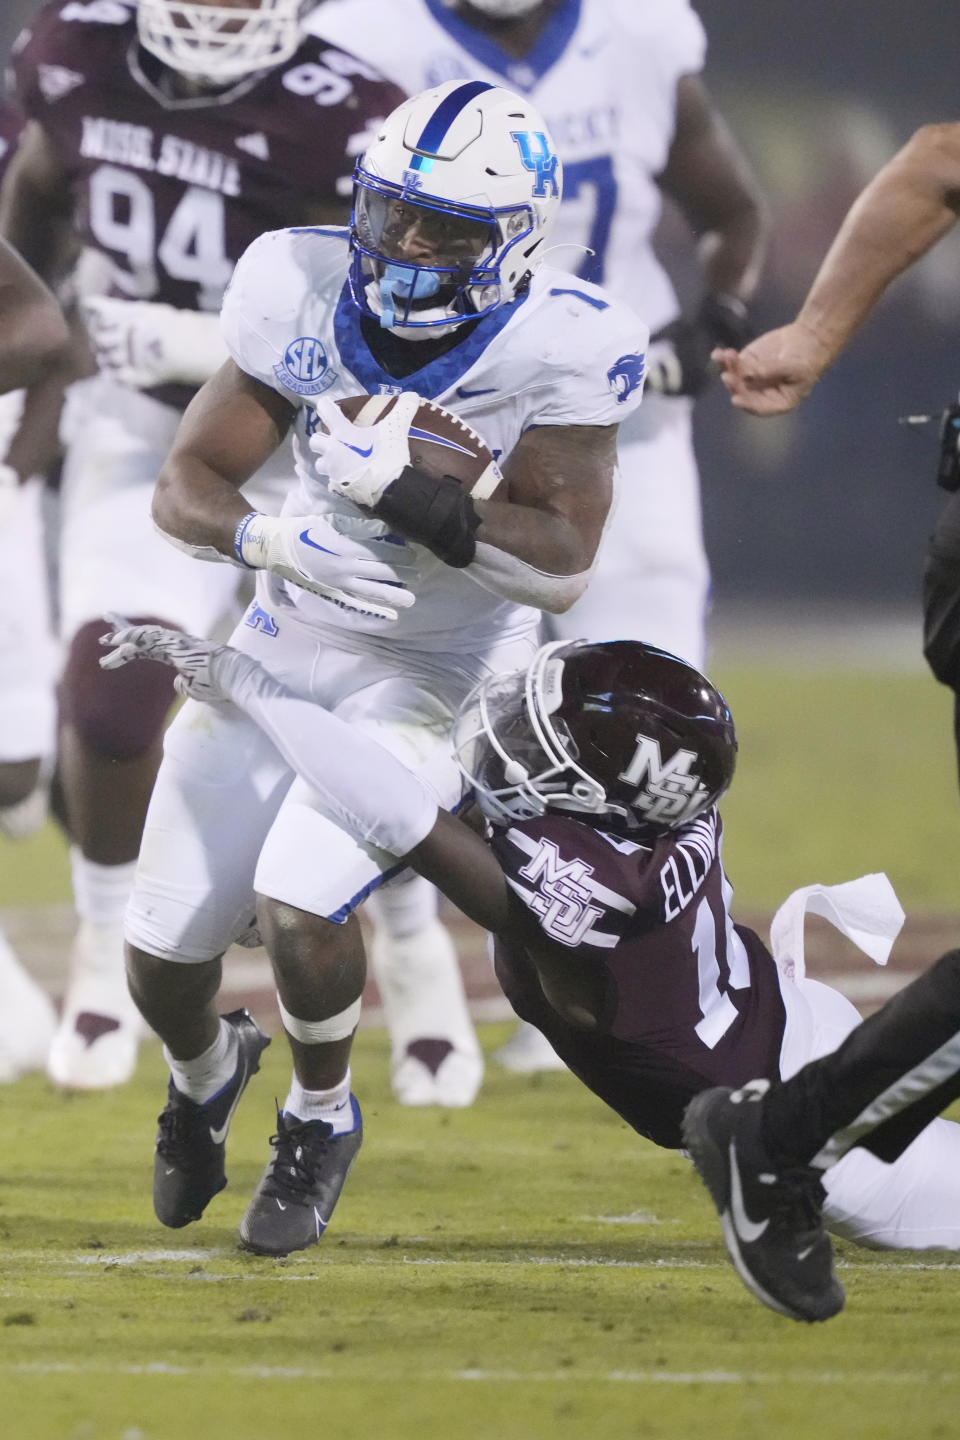 Kentucky running back Ray Davis (1) runs through an attempted tackle by Mississippi State's Corey Ellington during the first half of an NCAA college football game in Starkville, Miss., Saturday, Nov. 4, 2023. (AP Photo/Rogelio V. Solis)